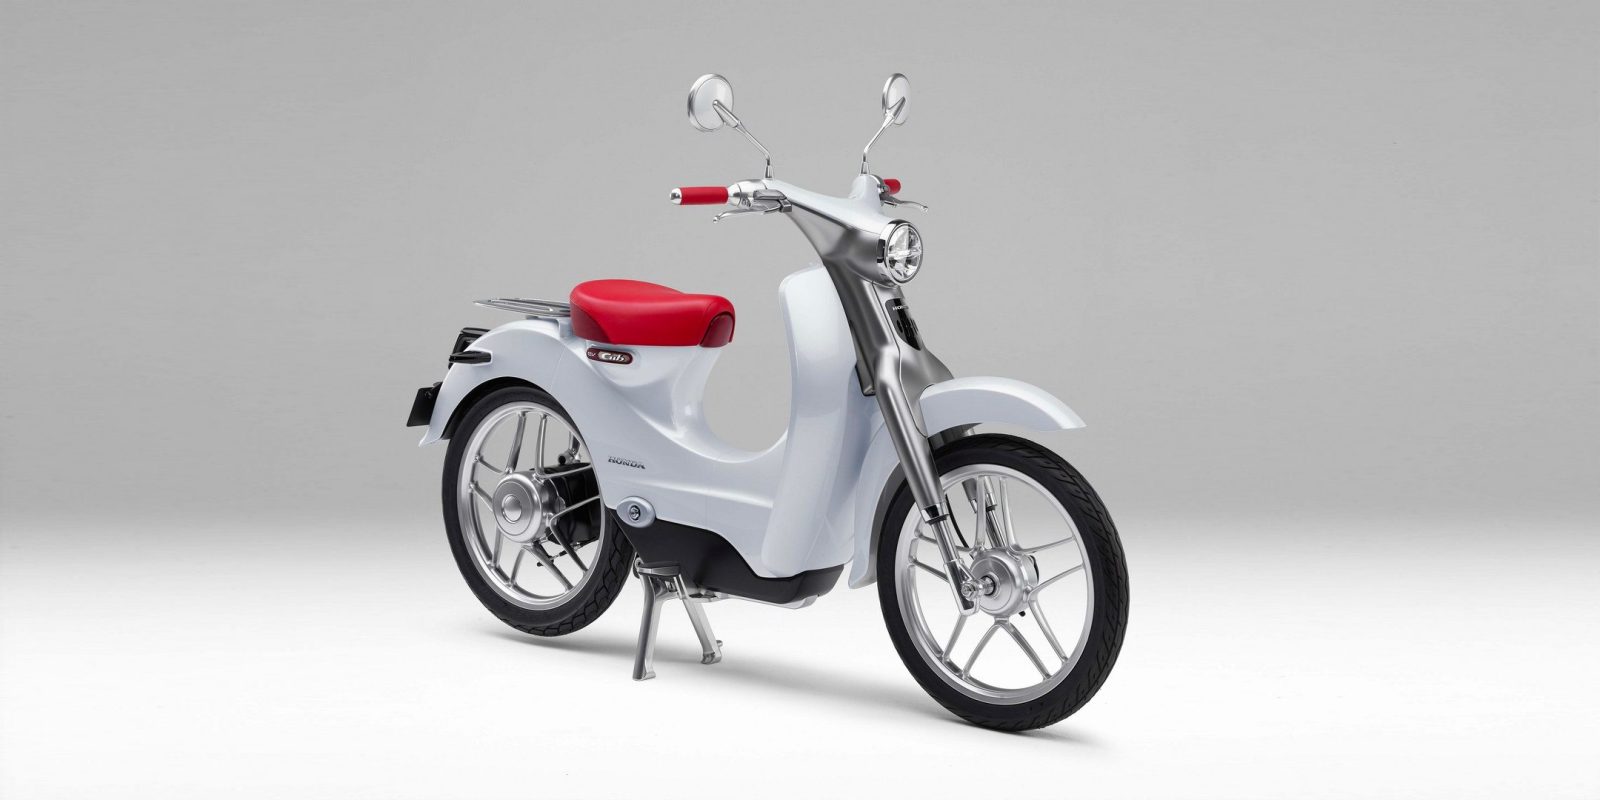 Honda working on electric Super new patent shows progress